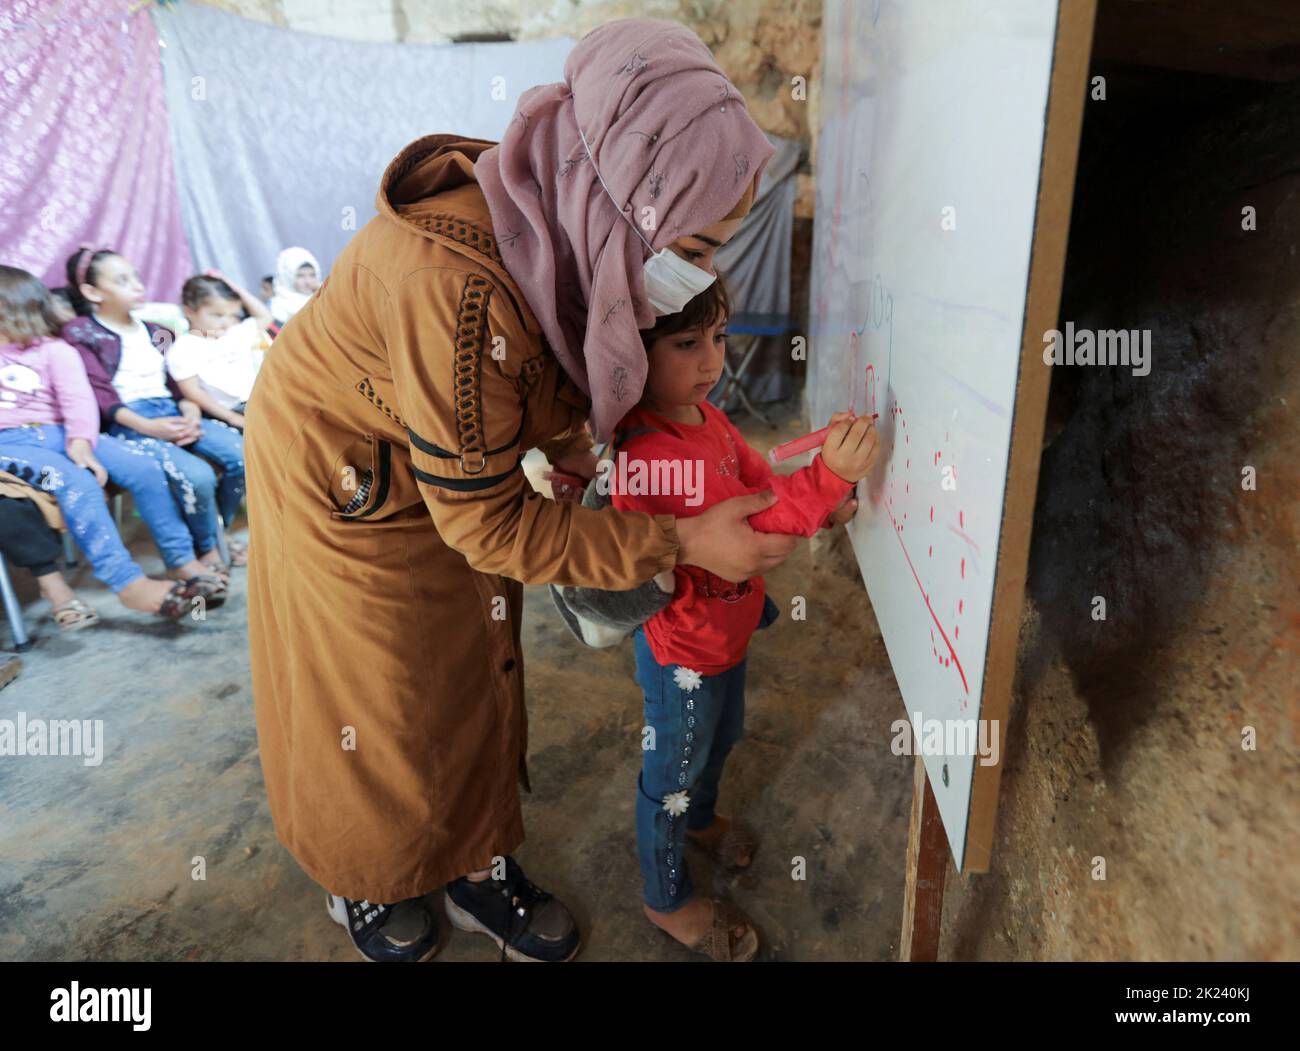 A teacher helps a student to write on a board inside a Byzantine castle that was transformed into a makeshift school for the internally displaced children in the opposition-held Idlib, Syria September 20, 2022. REUTERS/Khalil Ashawi Stock Photo